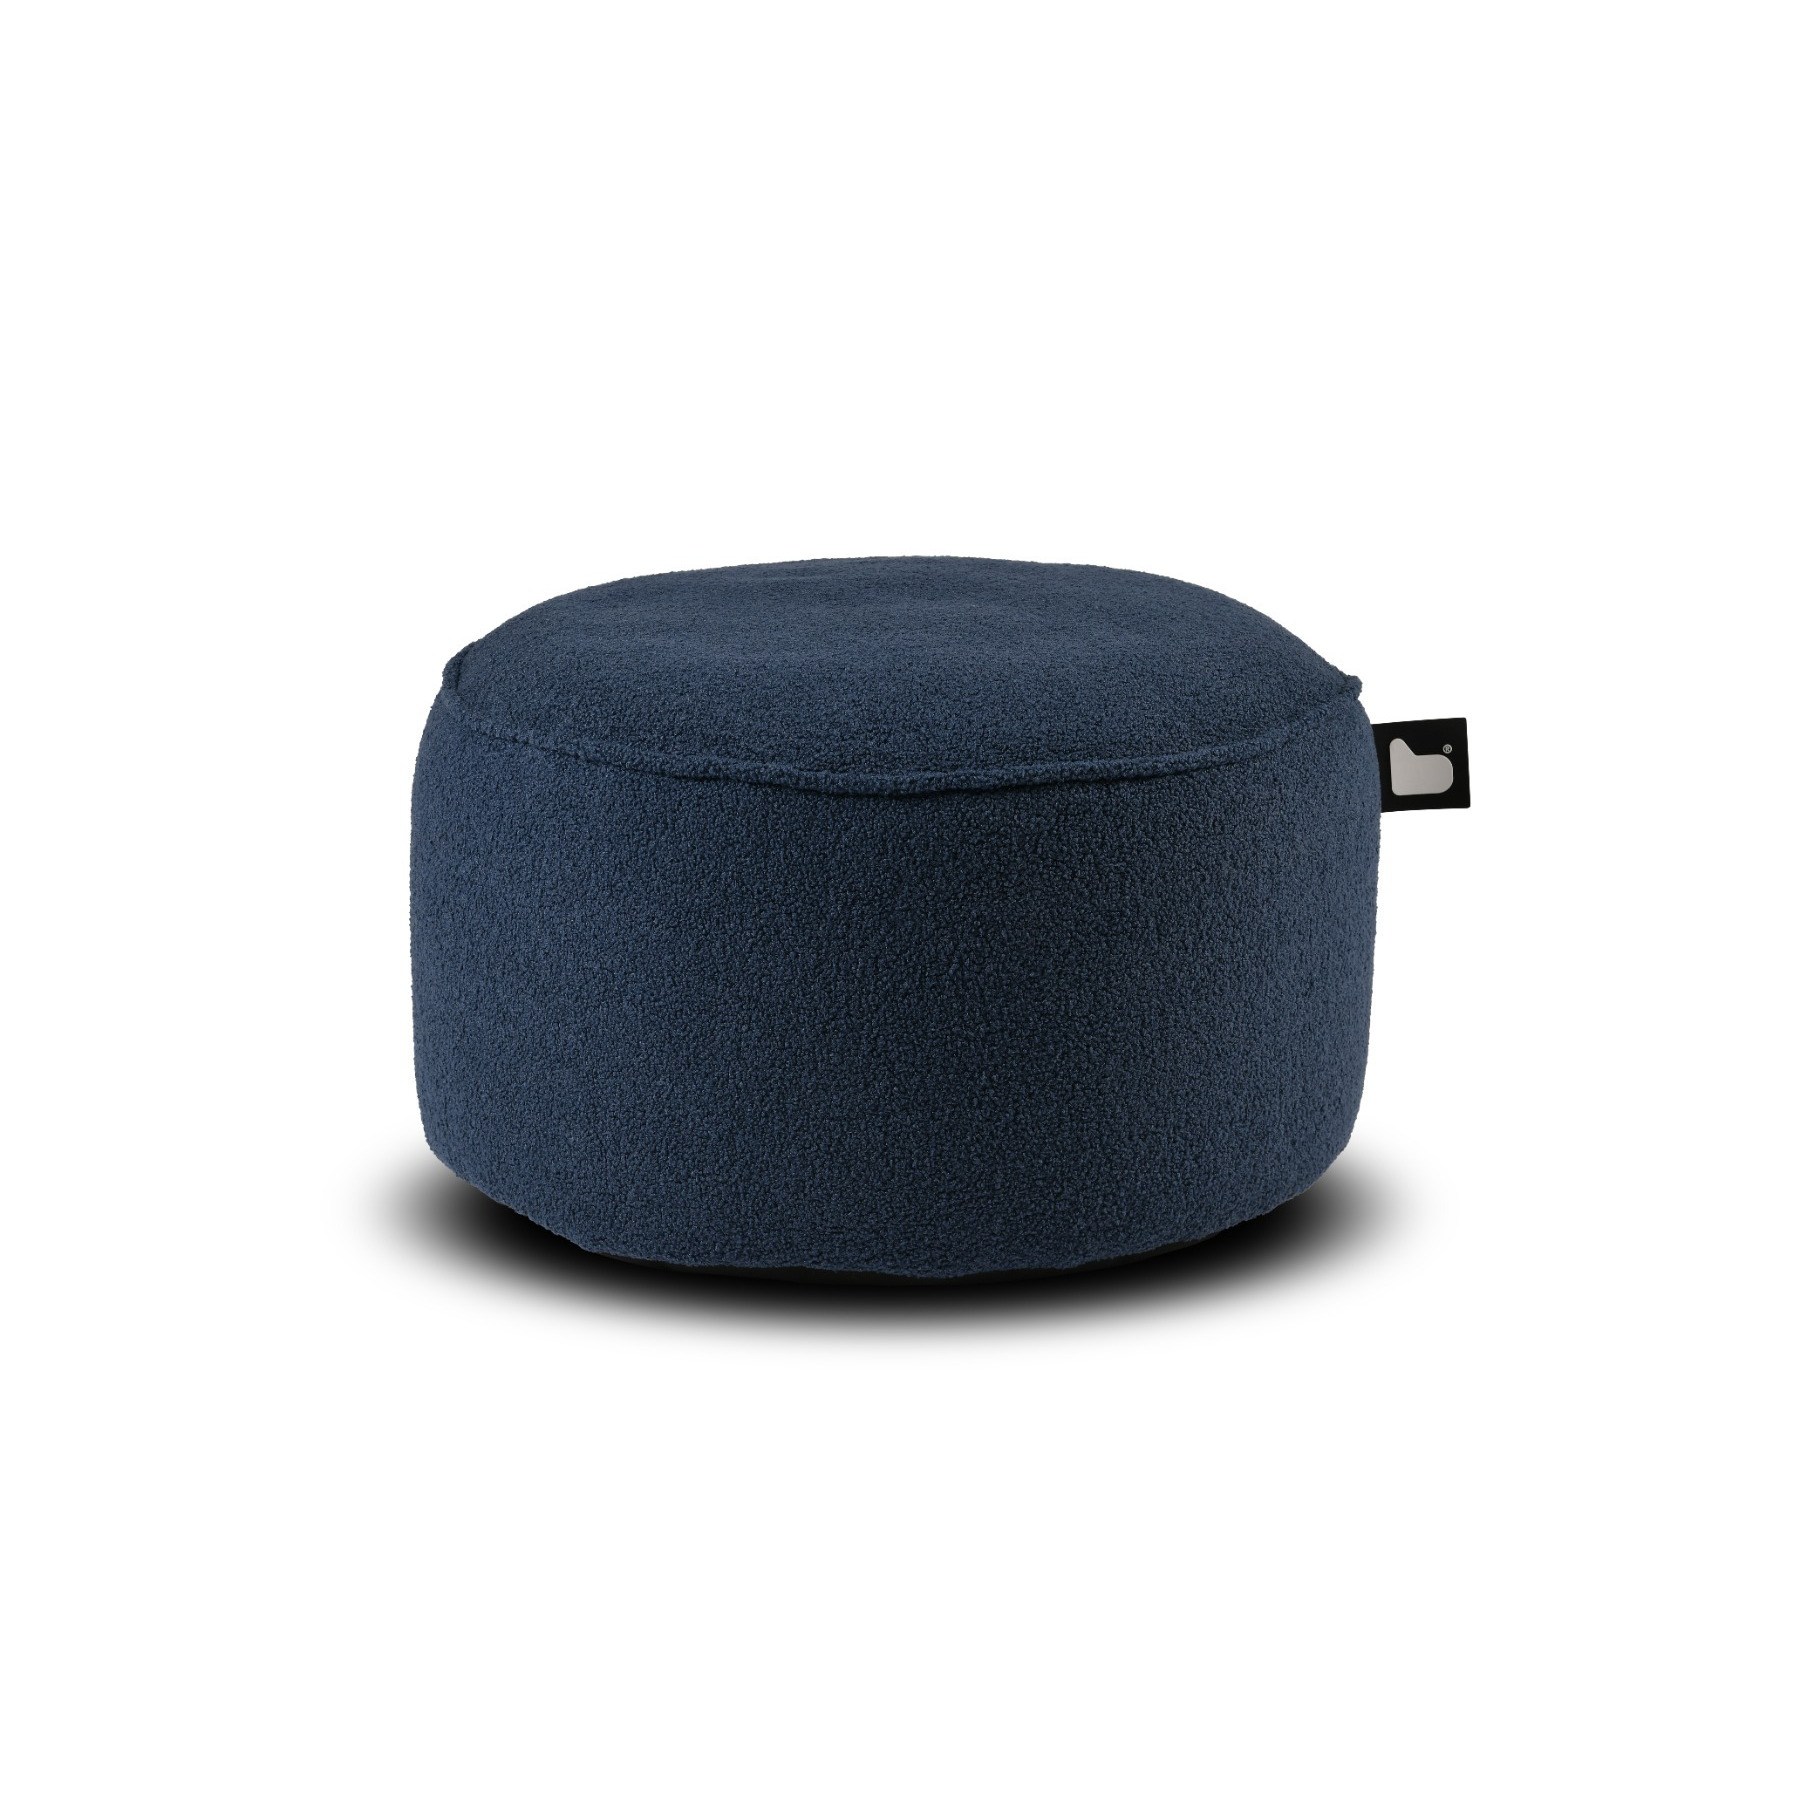 Extreme Lounging B Pouffe Teddy Navy - image 1